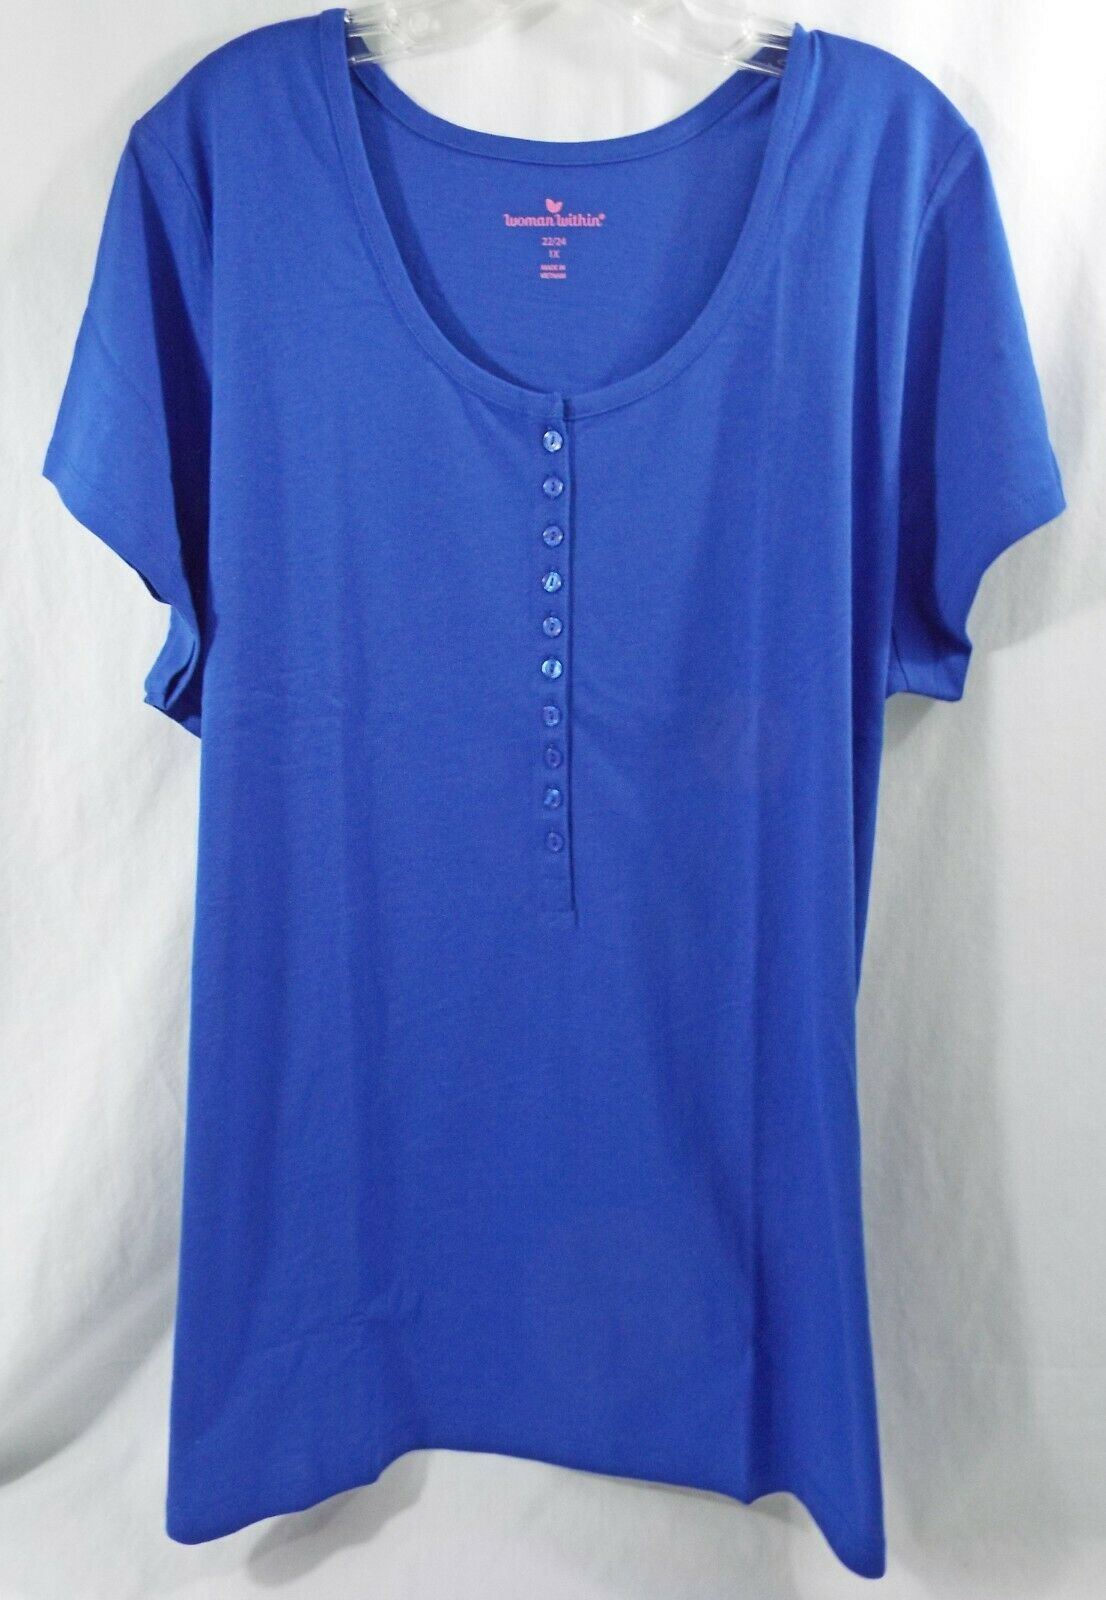 Women's Plus Size Henley T Shirt in Royal Blue Short Sleeves - Tops